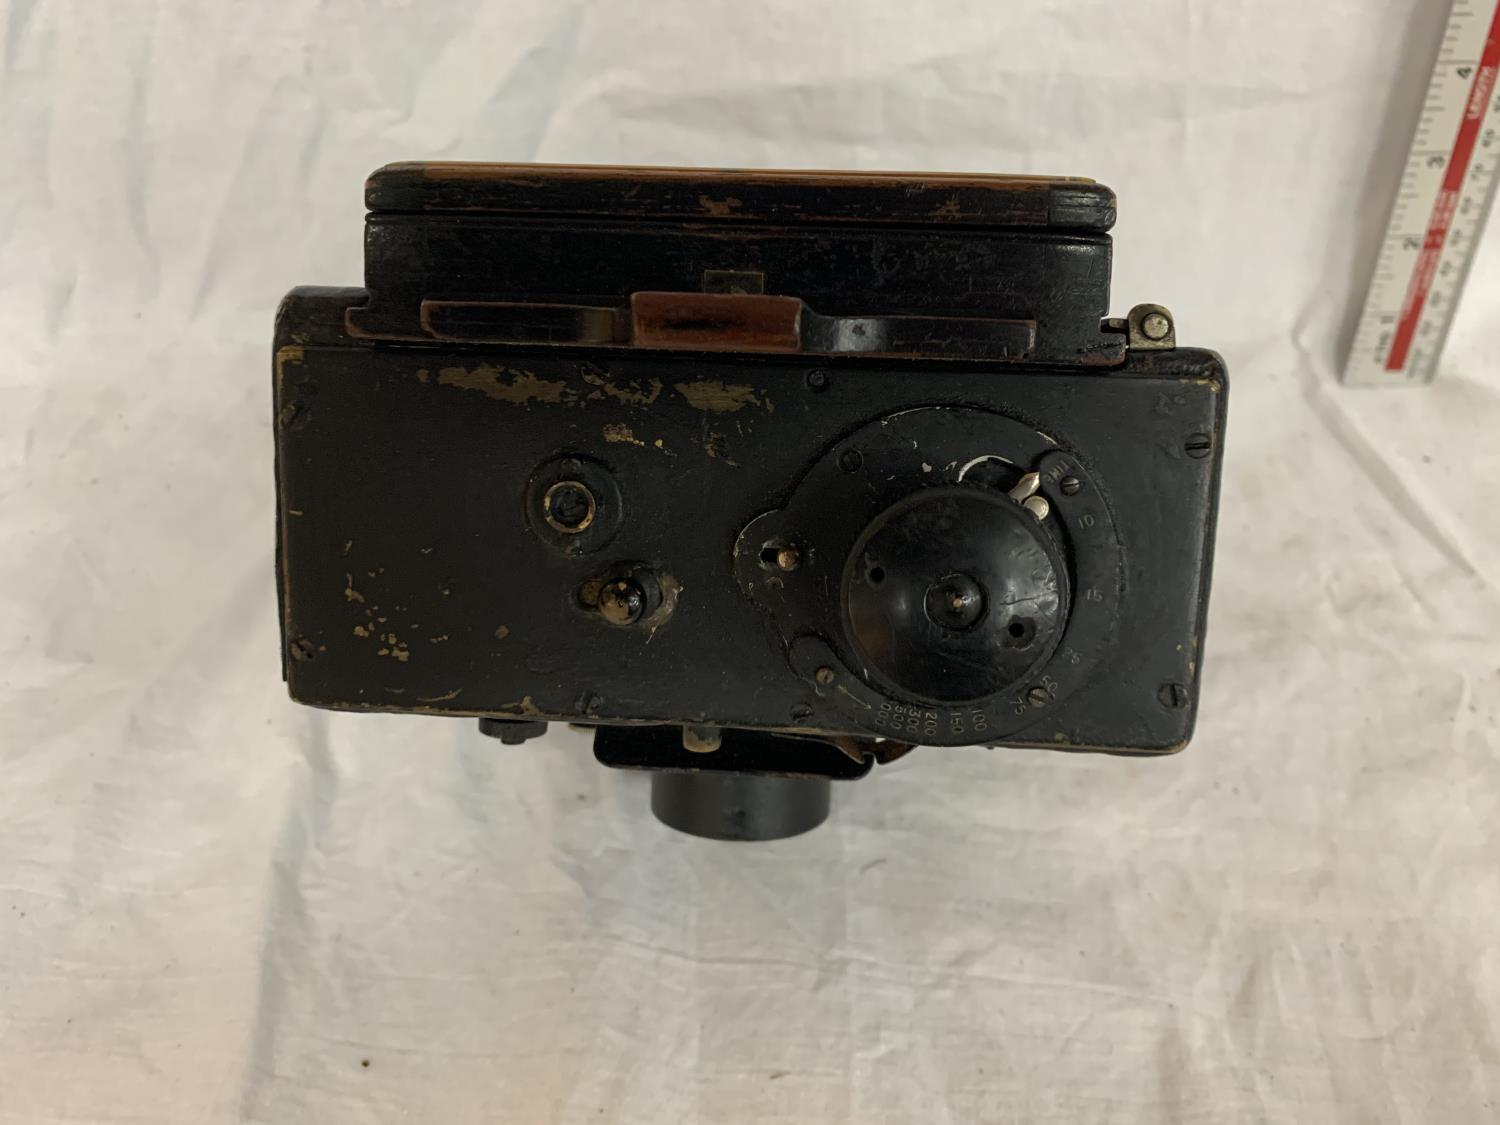 A VINTAGE ROSS OF LONDON CAMERA WITH DAYLIGHT SLIDE - Image 6 of 6